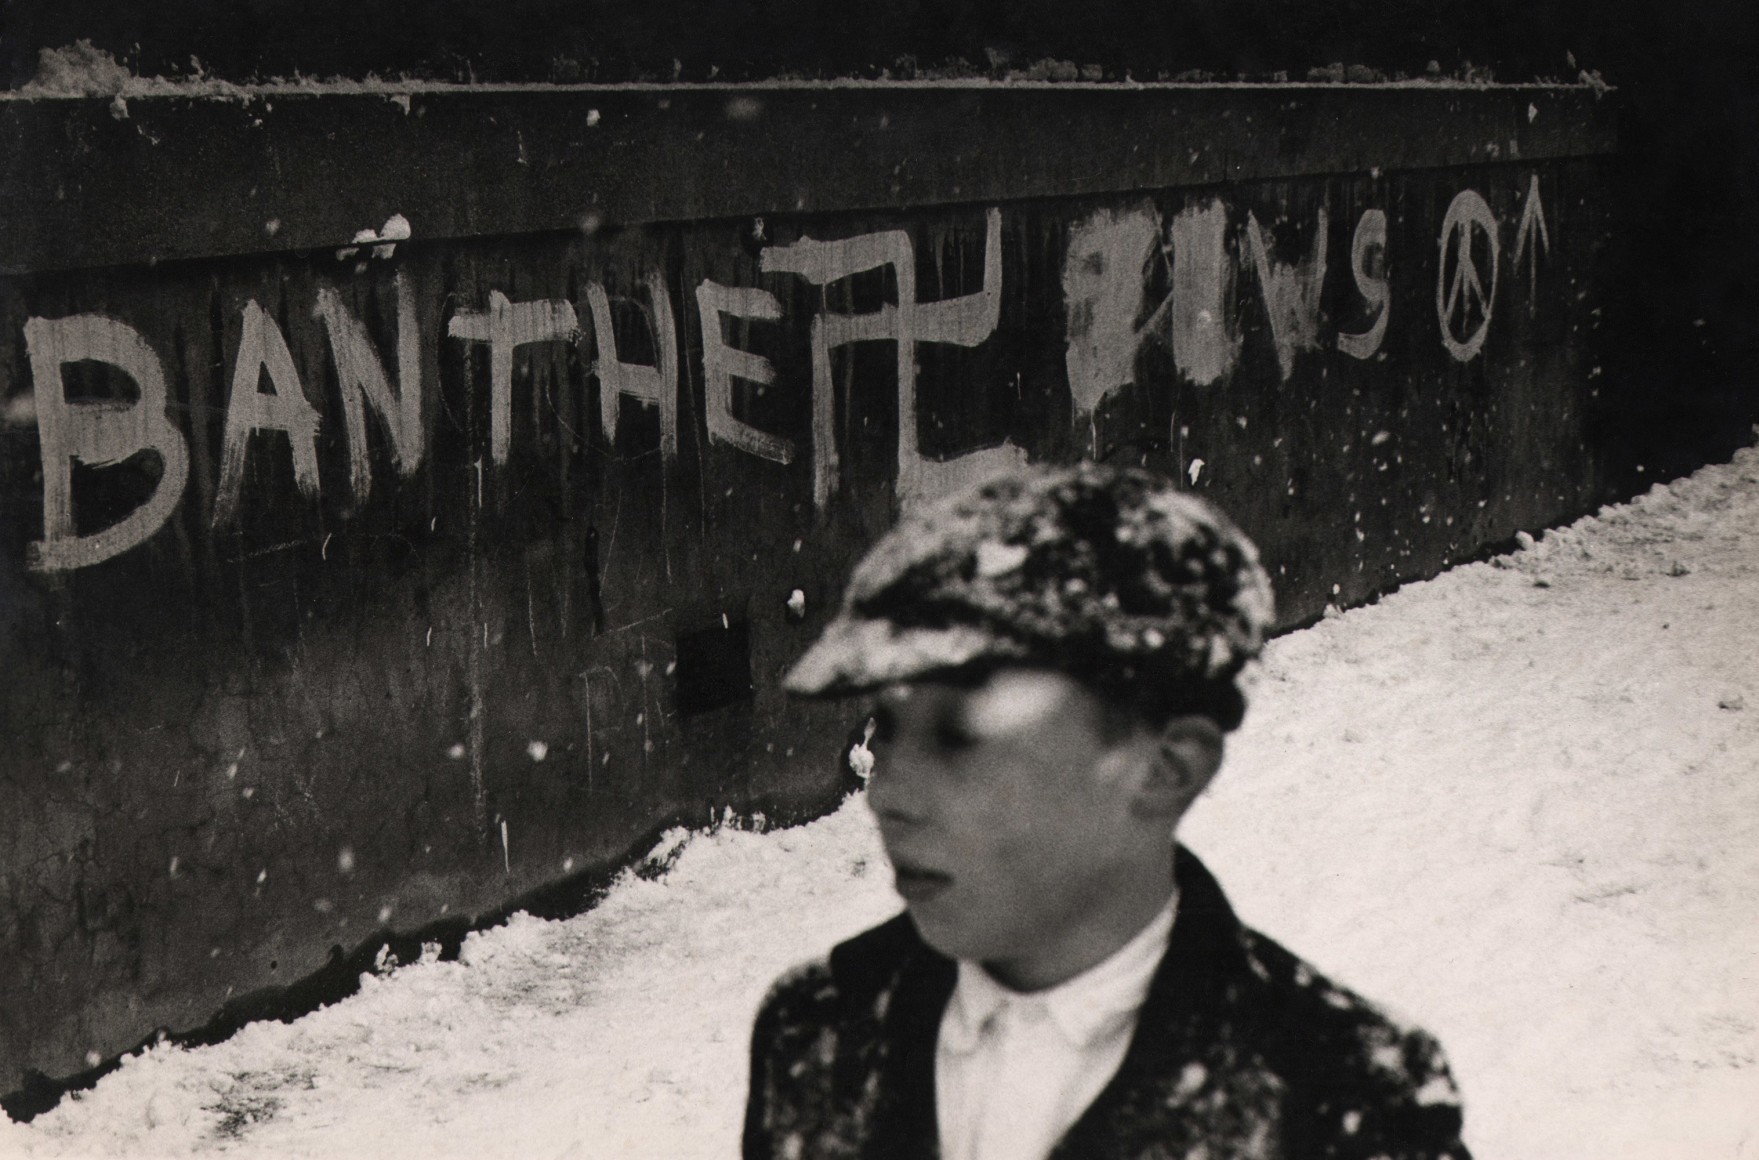 40. Donald McCullin, A bleak scene which expresses a bleak mood, from Finsbury Park, c. 1966. A young man in the foreground walks through the snow; the wall behind him reads &quot;ban the Jews&quot; in graffiti.